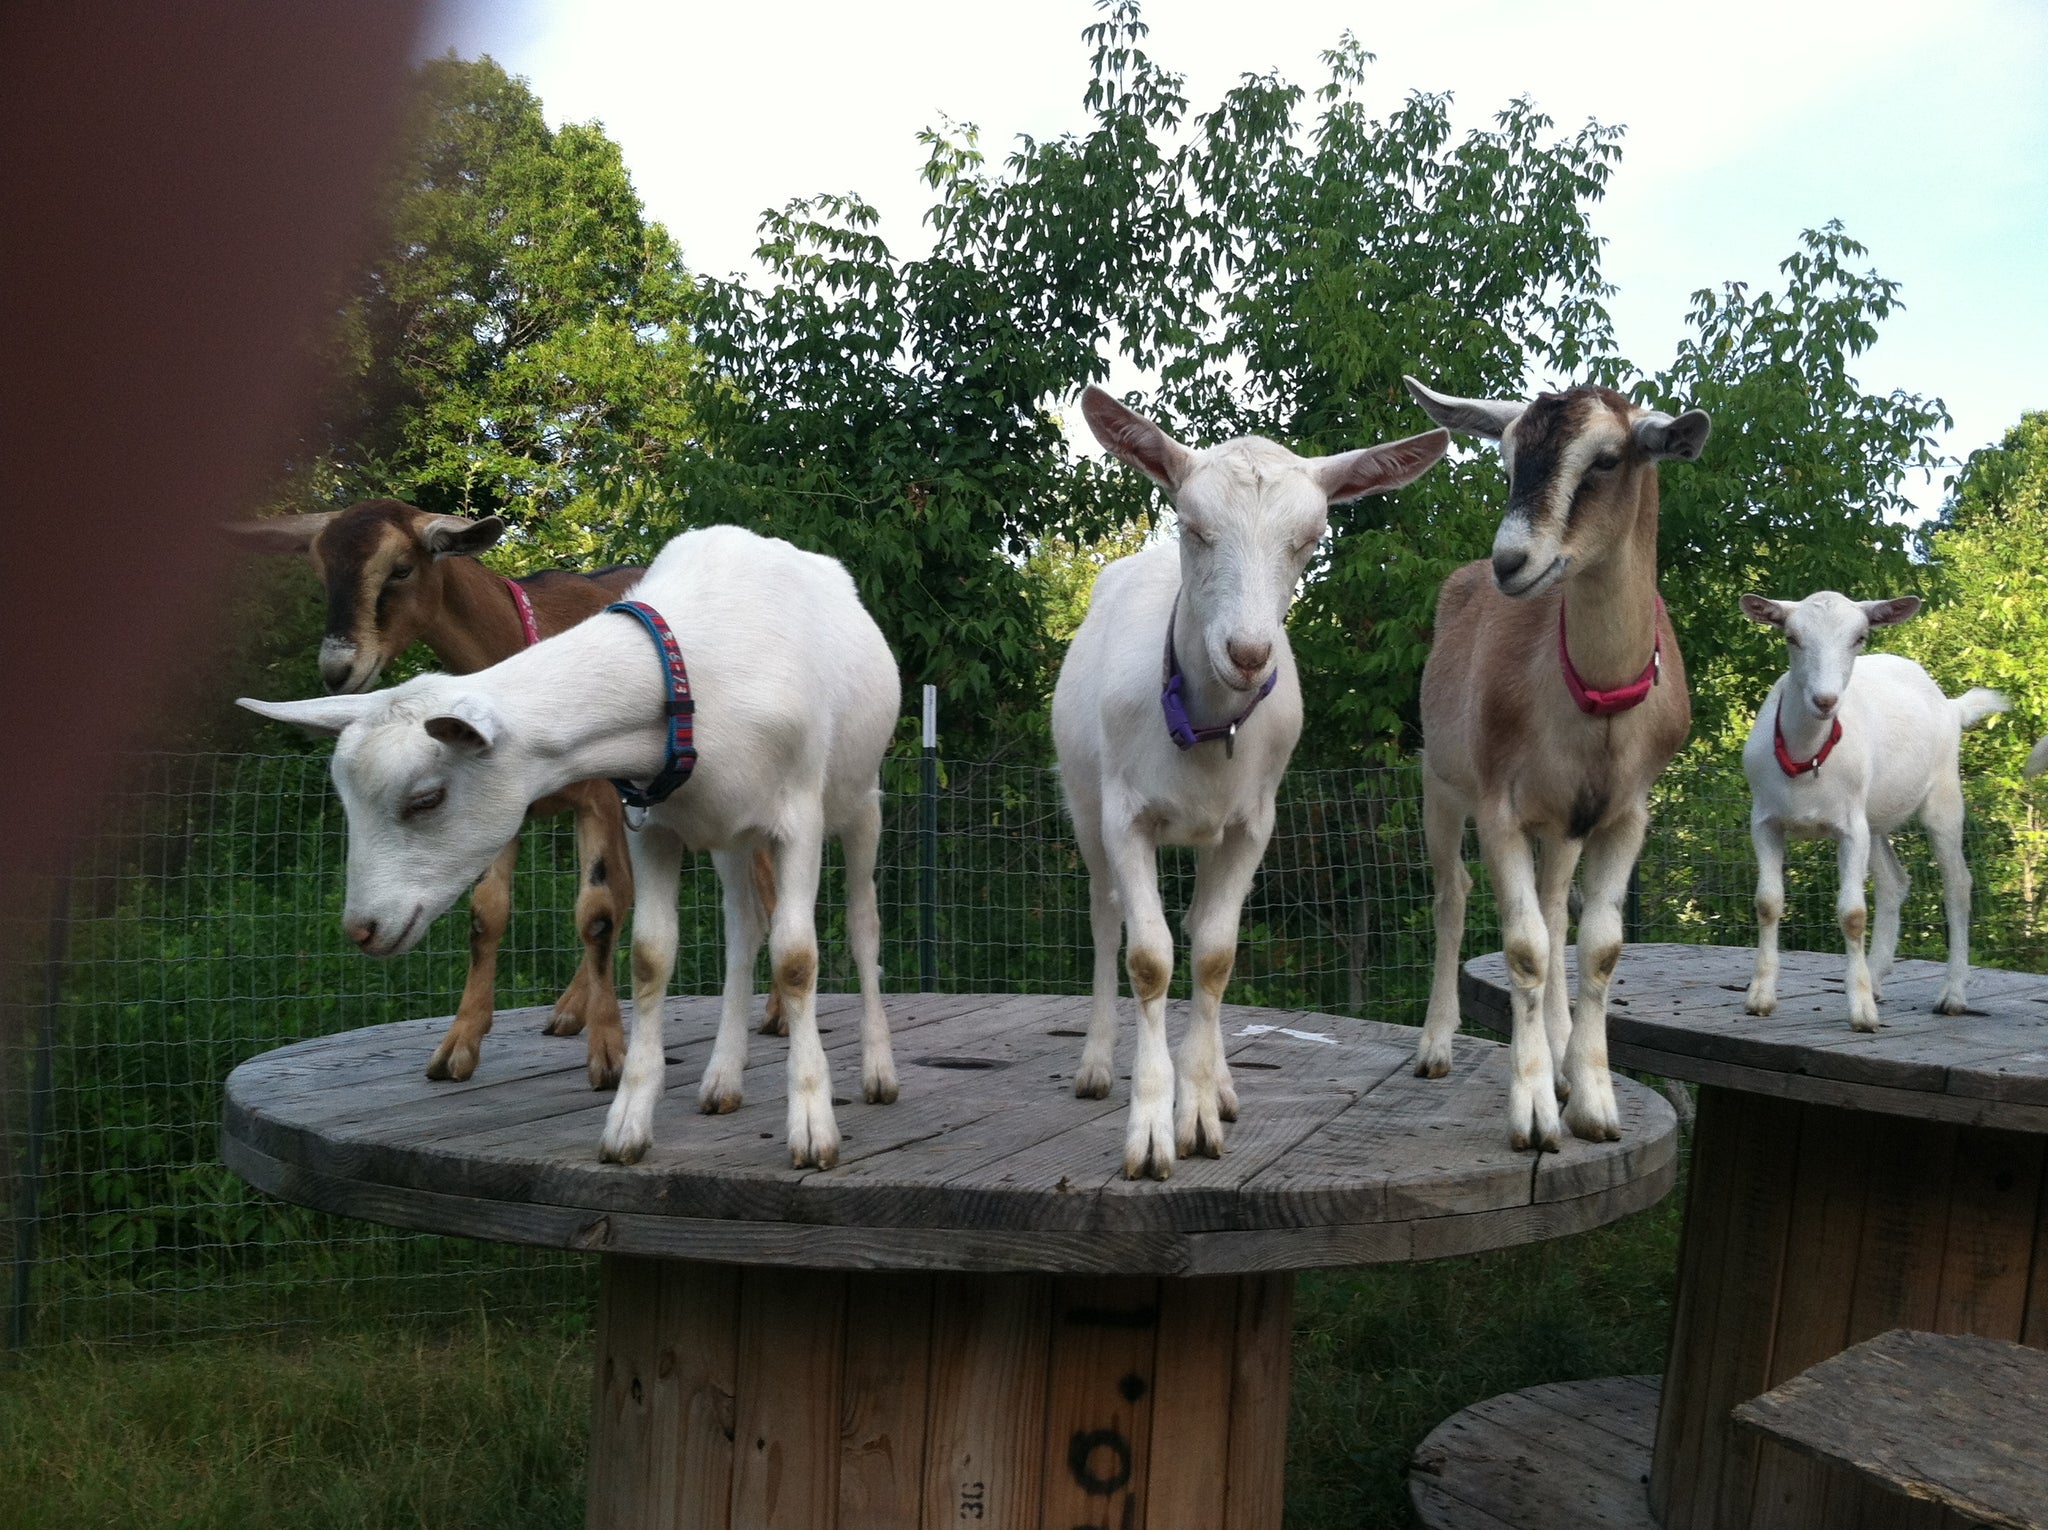 5 Interesting Facts About Goats That May Surprise You